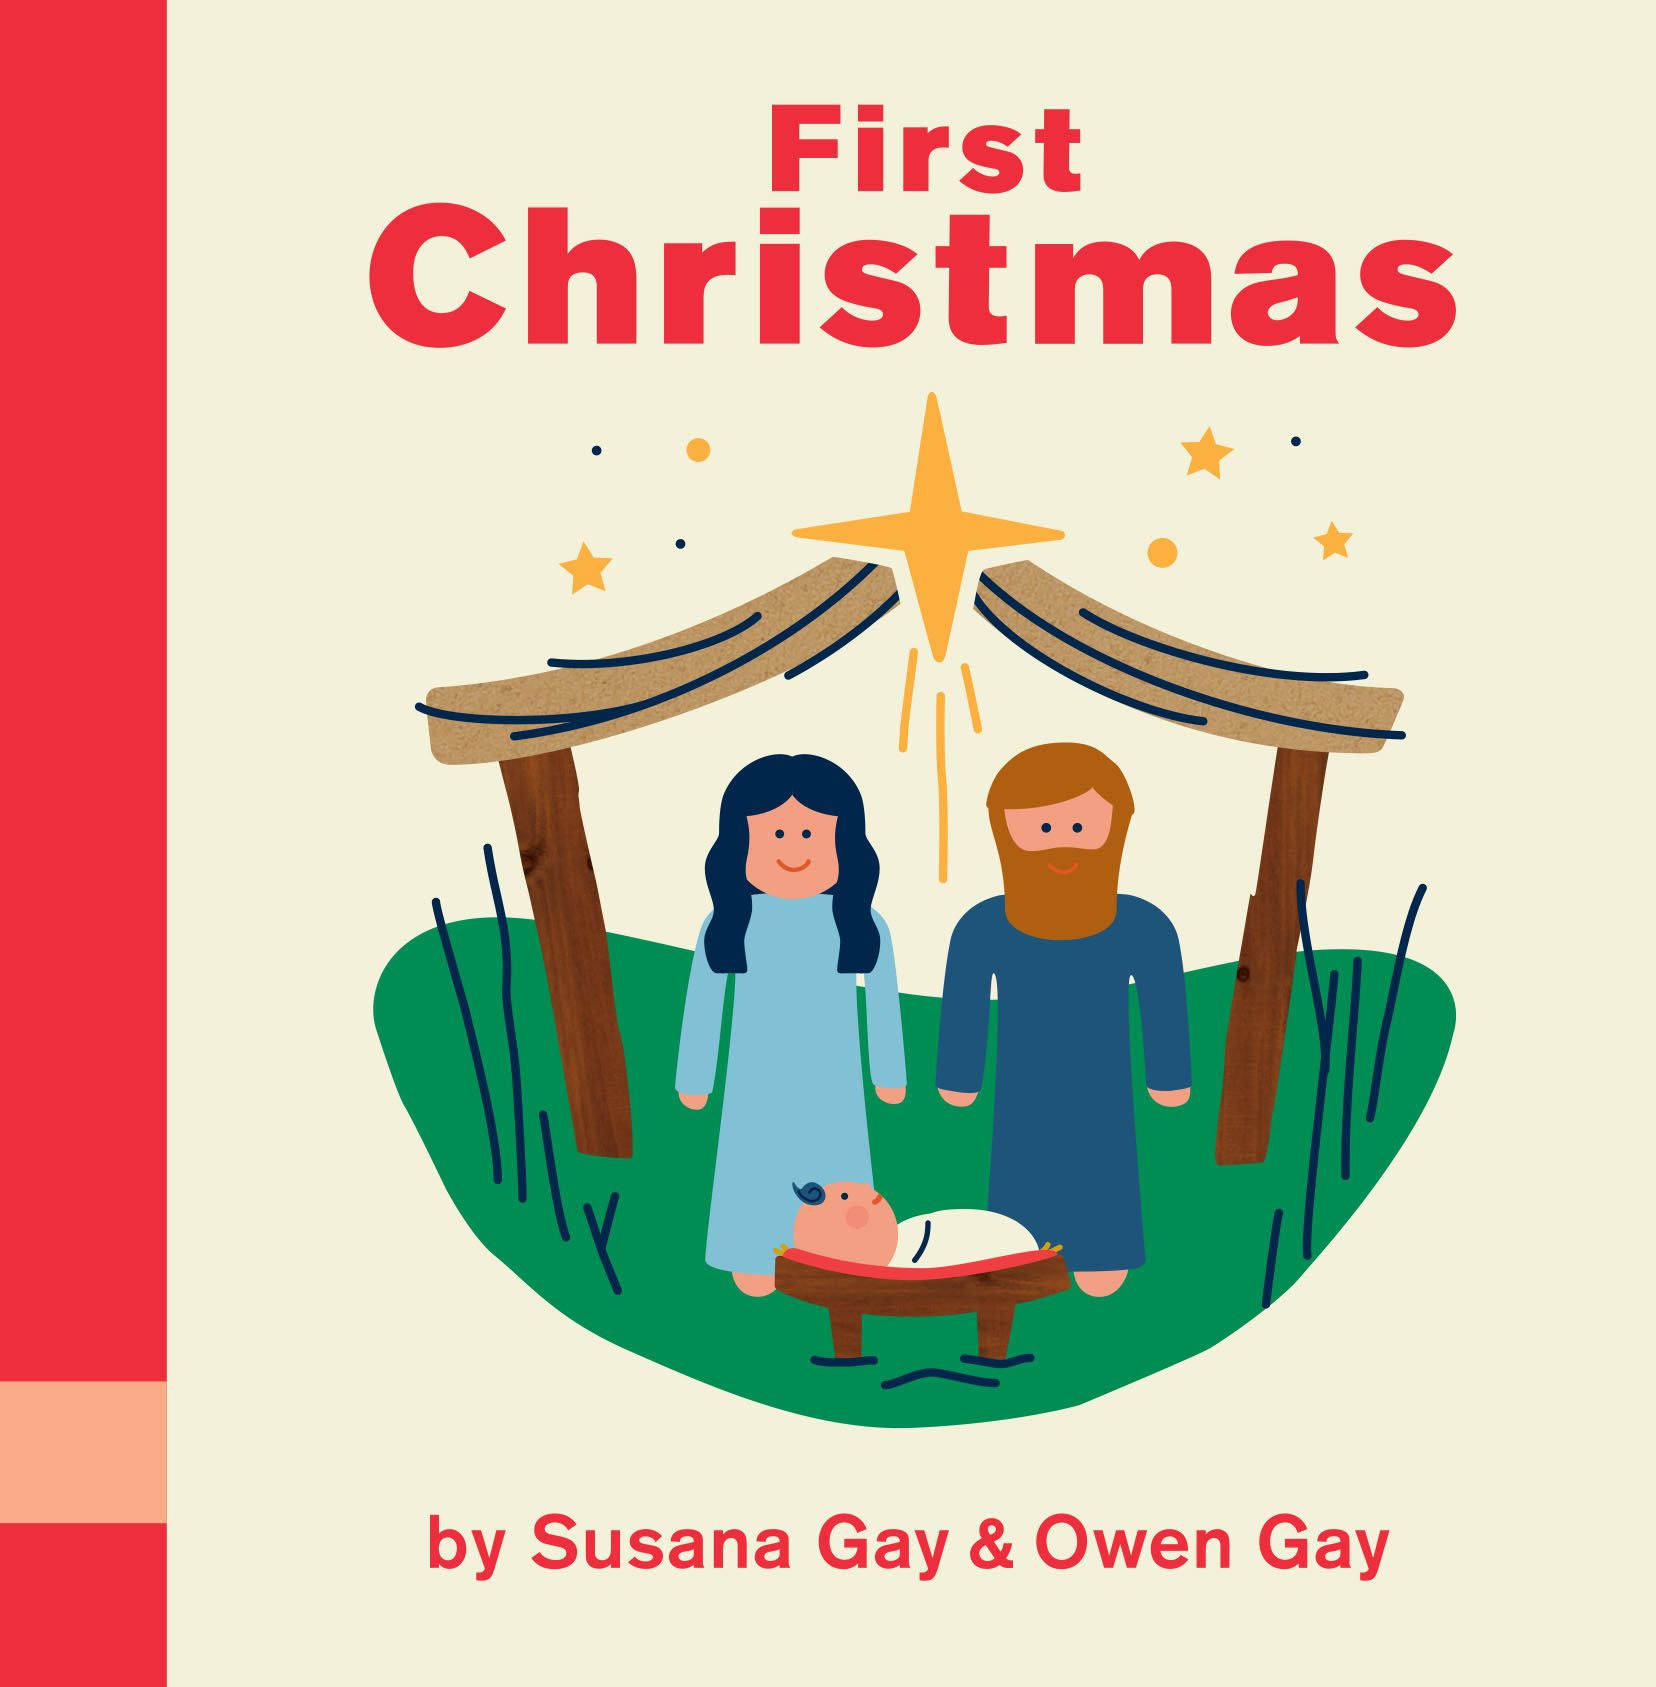 First Christmas [Book]